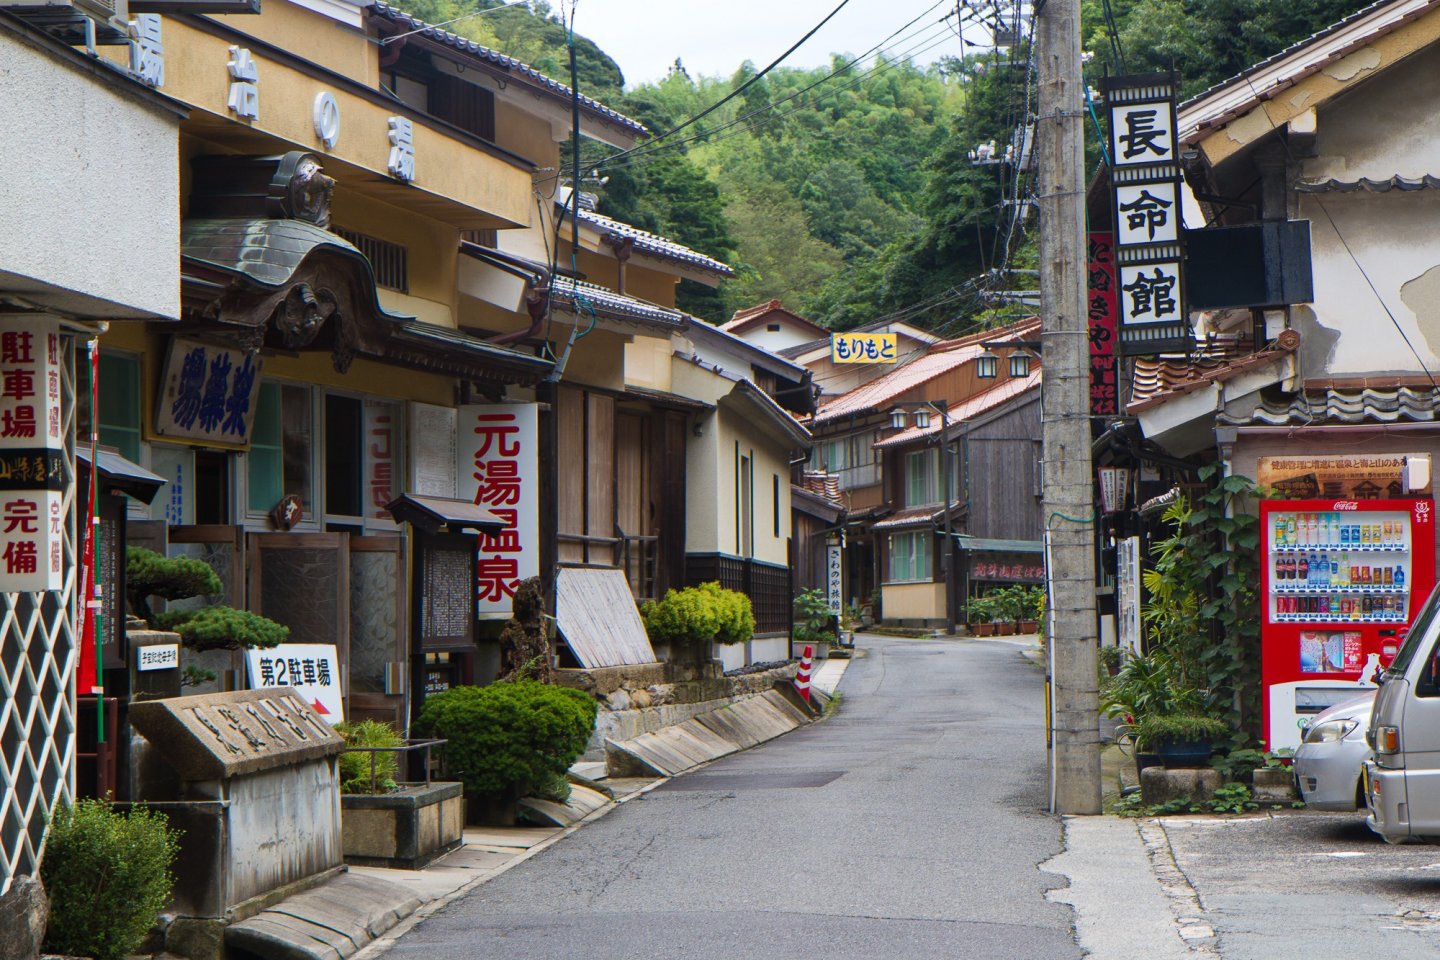 Moto-yu, on the left, is one of the several bathhouses along the single-lane road of Yunotsu